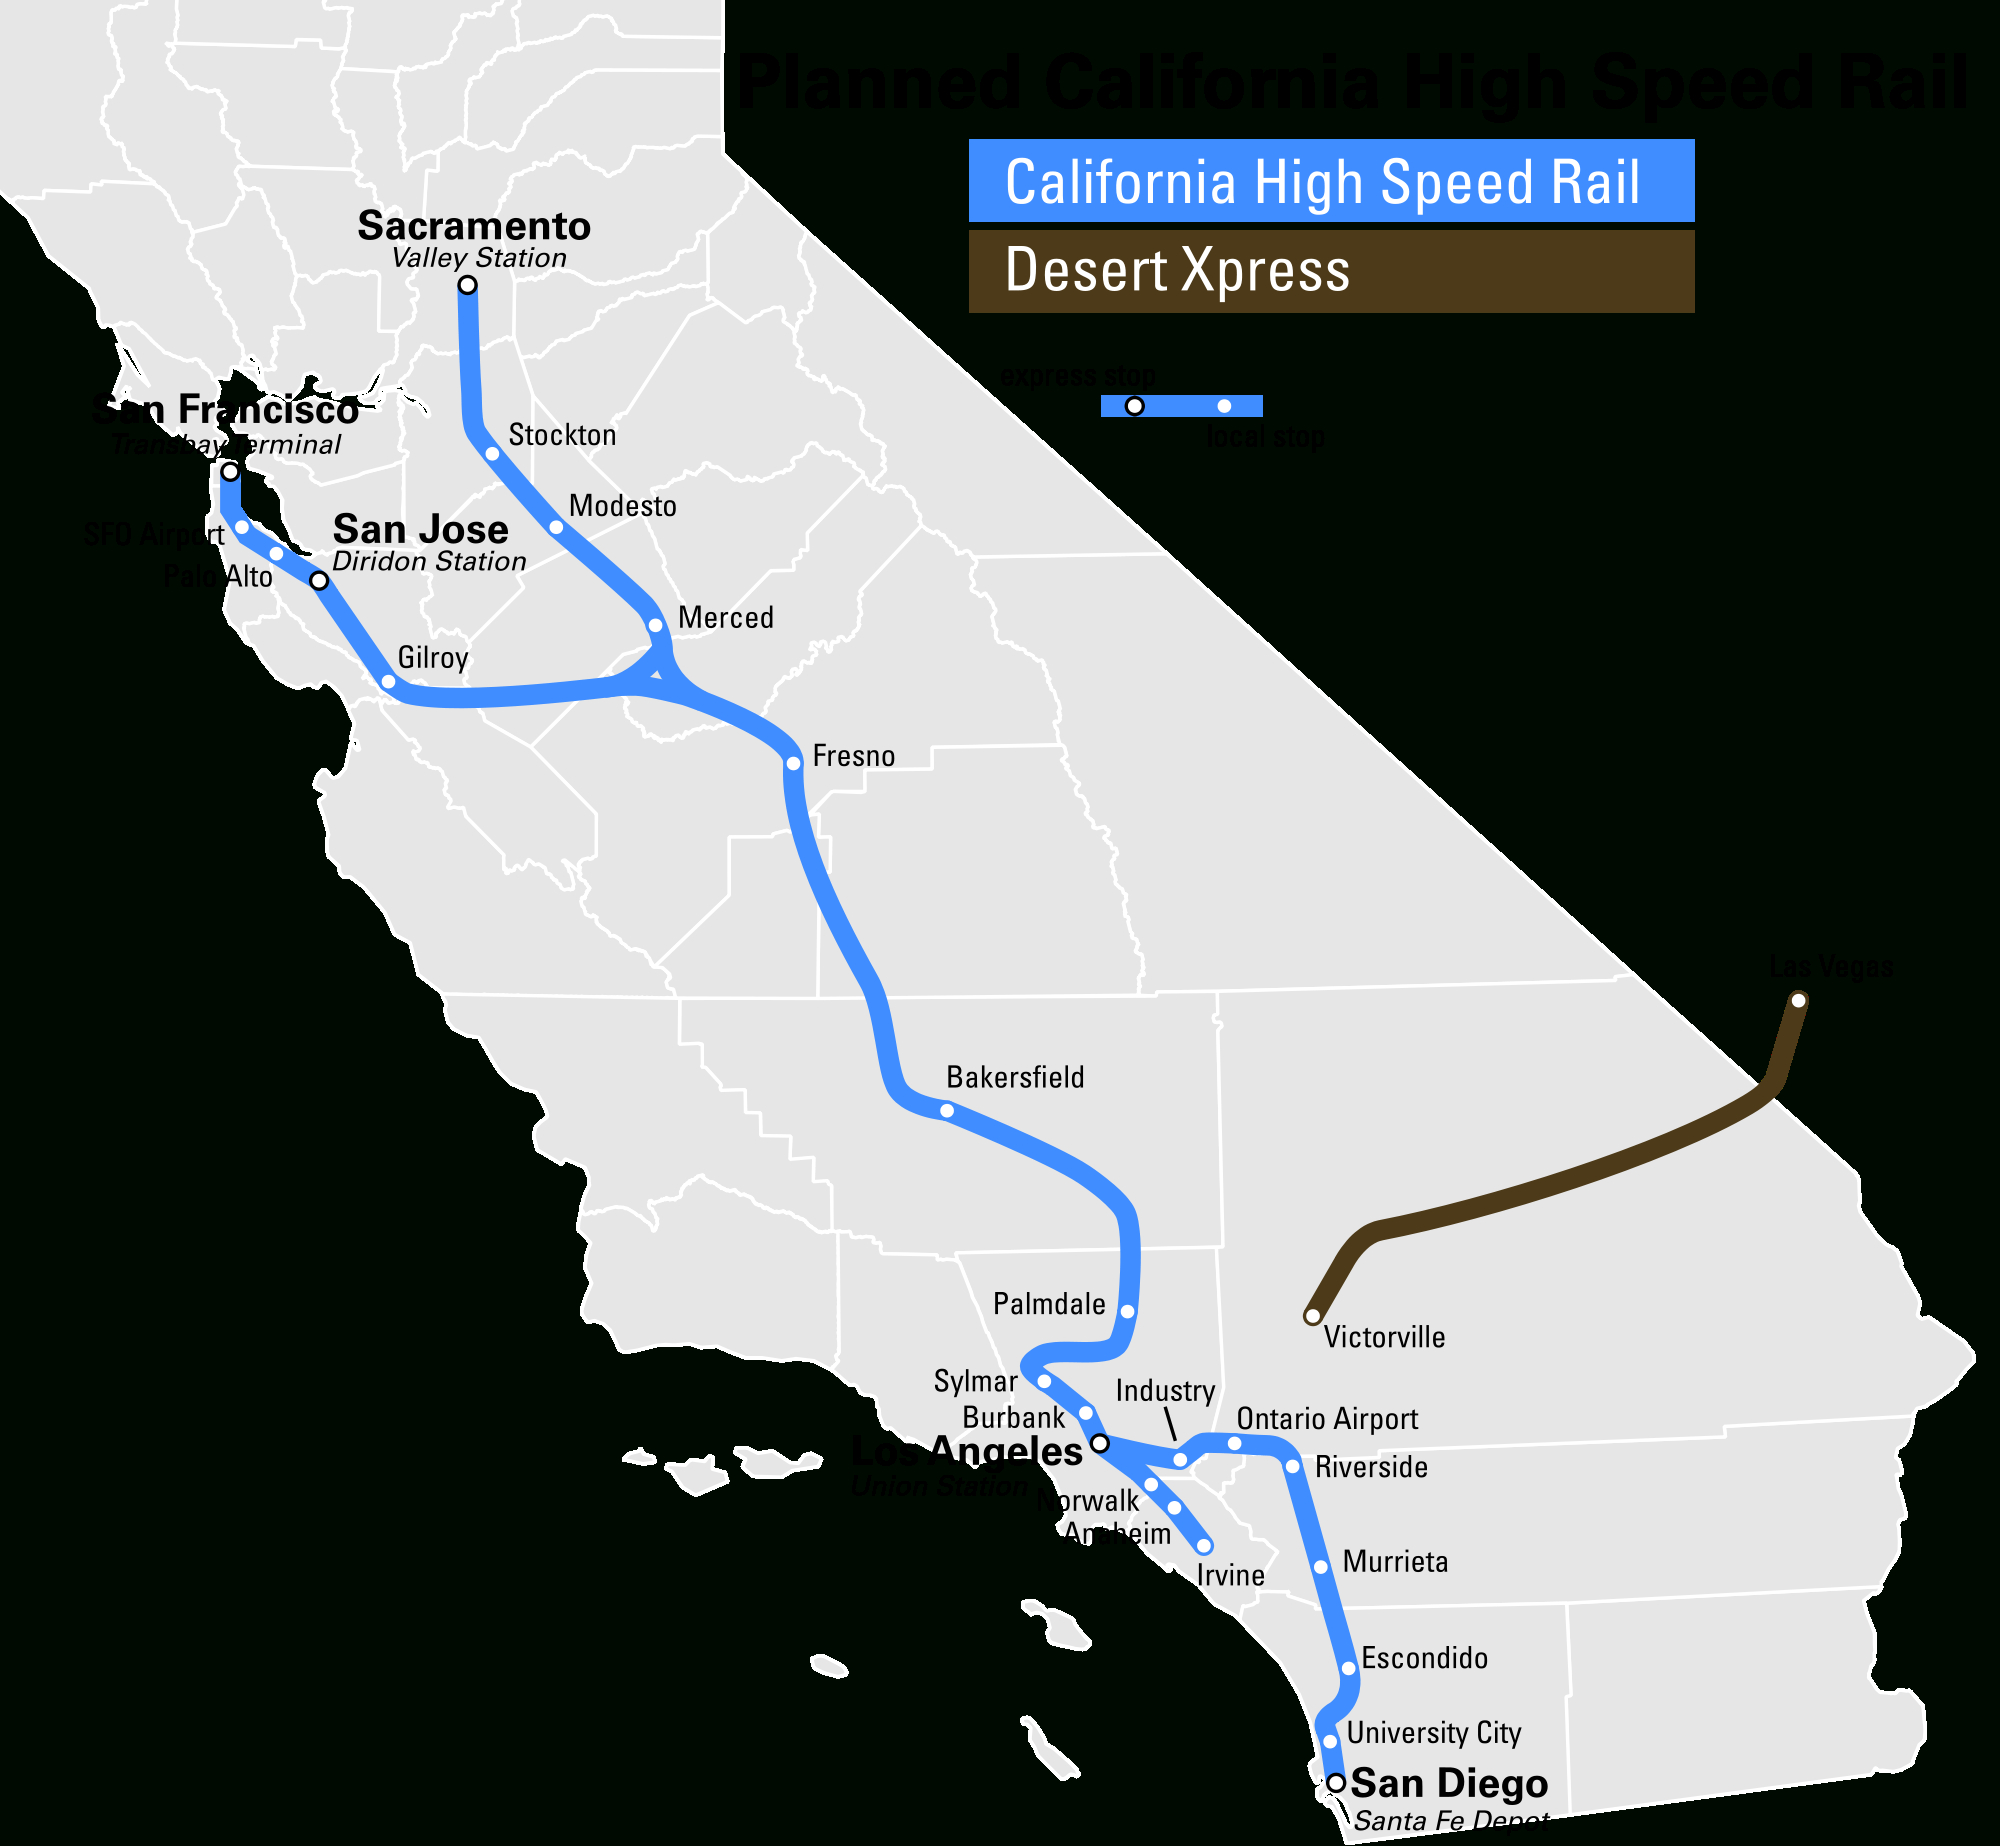 High Speed Rail To Las Vegas Breaks Ground 2017 - Canyon News - California High Speed Rail Project Map